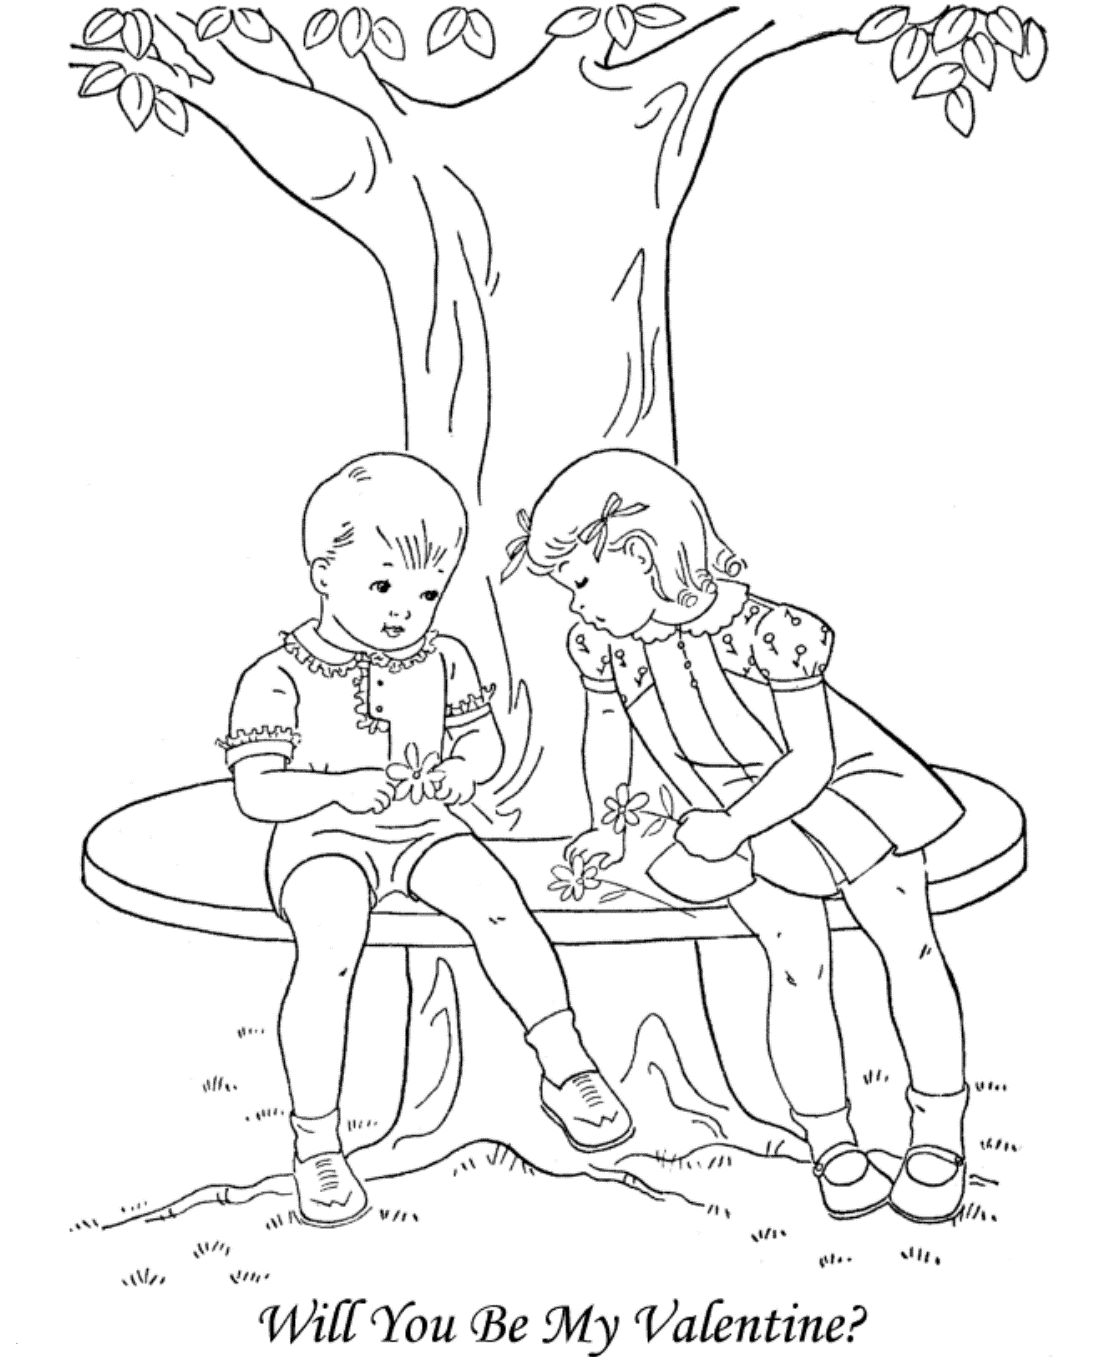 Will You Be My Valentine 08d3 Coloring Page